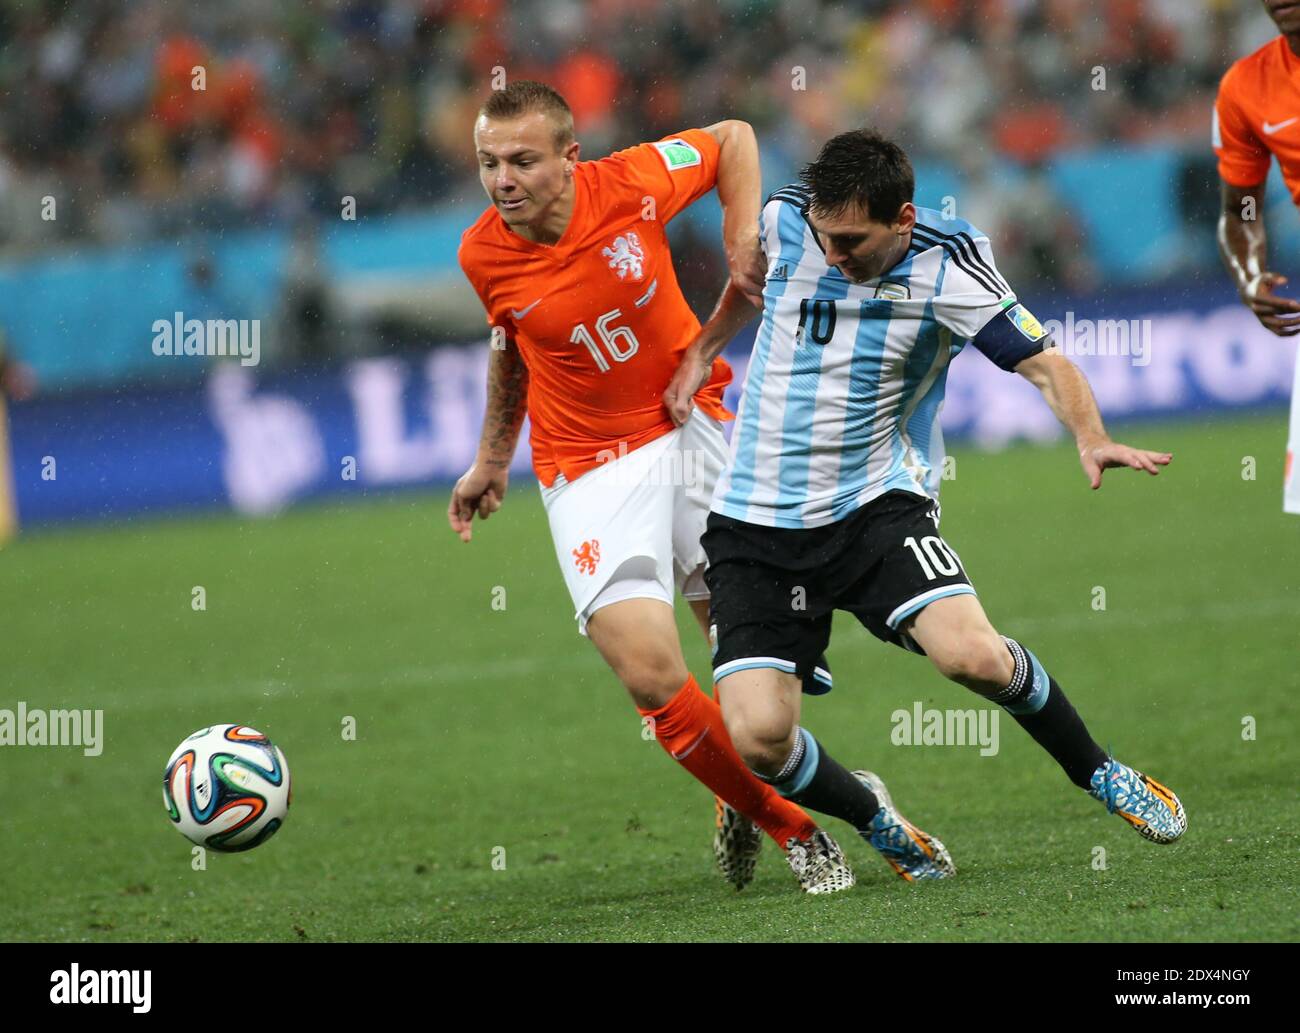 Jordy Clasie of Holland trying to stop Lioenl Messi of Argentina - Soccer - FIFA World Cup 2014 - Semi Final - Netherlands v Argentina - Arena de Sao Paulo, Brazil, Wednesday July 9, 2014. Photo by Giuliano Bevilacqua/ABACAPRESS.COM Stock Photo